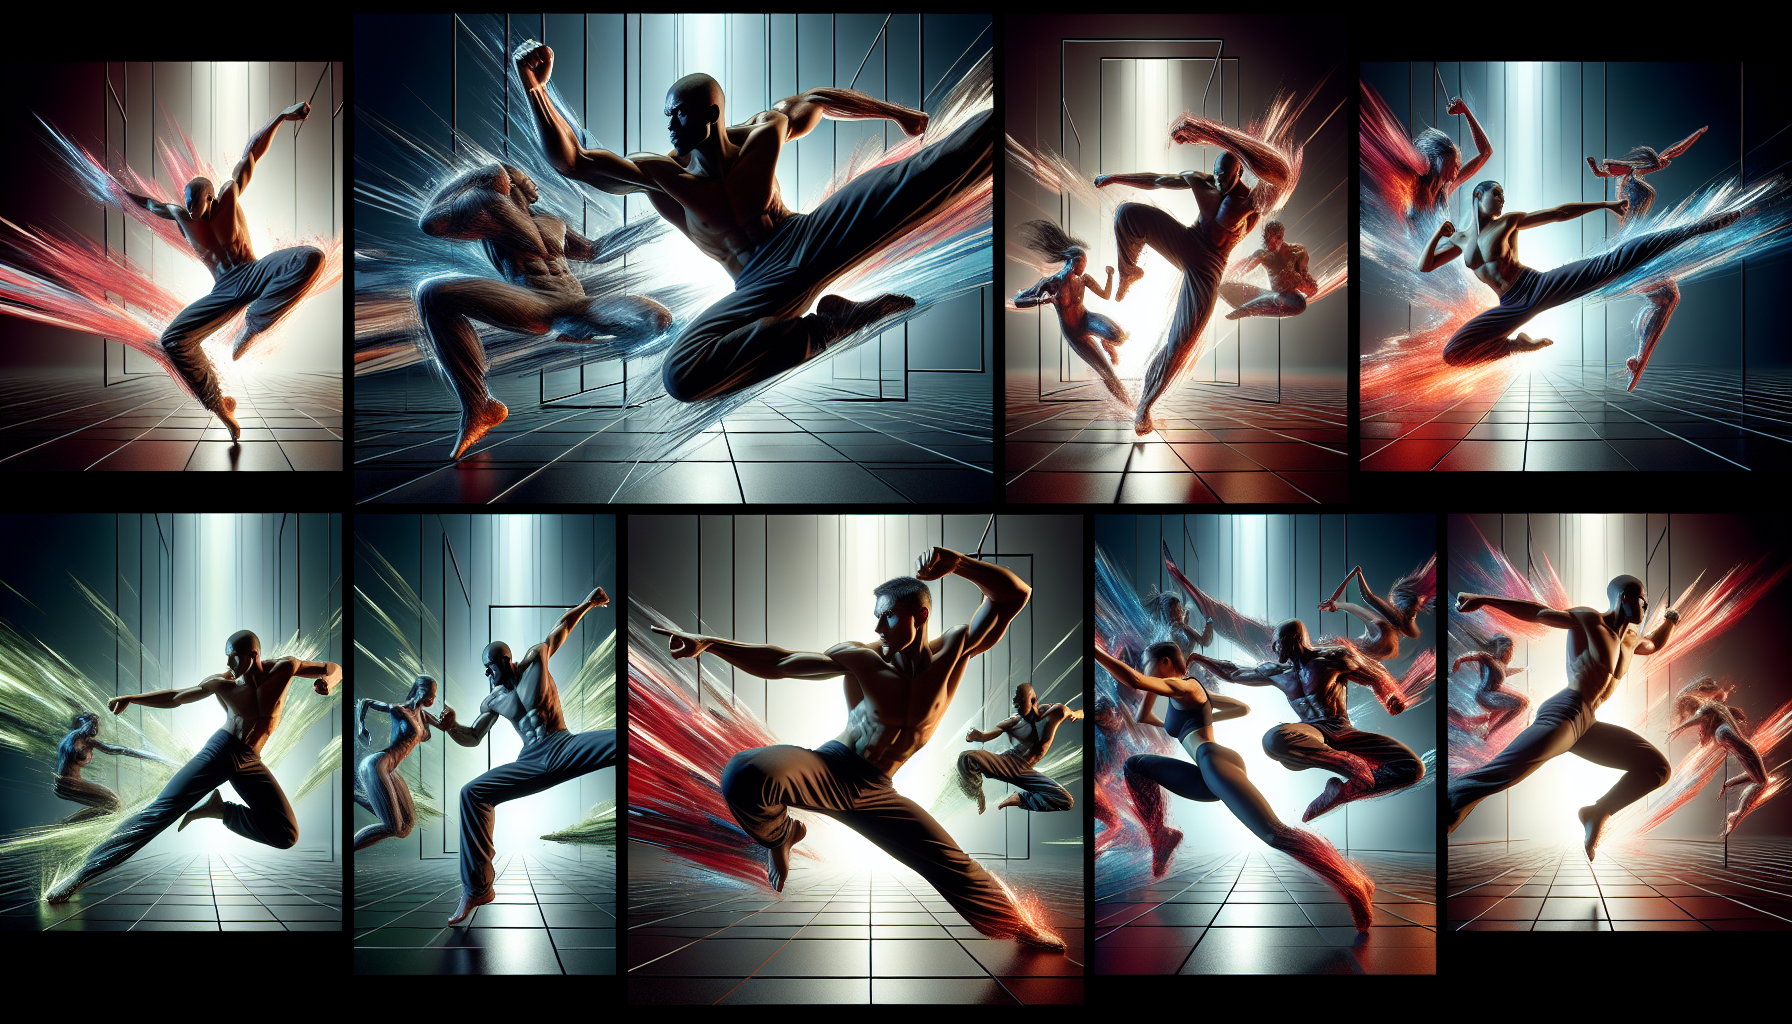 An intricately choreographed action sequence captured in a series of highly detailed, photorealistic frames. The scene is filled with dynamic poses hinting at agile movement and powerful strikes, under dramatic lighting that emphasizes depth and muscular anatomy. Both participants in the action sequence, Black male and Caucasian female, are in mid-motion, their bodies twisted in an expression of kinetic energy. All around, vivid, modern colors explode onto the scene, casting interesting highlights and shadows, adding a sense of urgency to the sequence. Boxes or panels are imposed on the sequence indicating a flowing storyline.